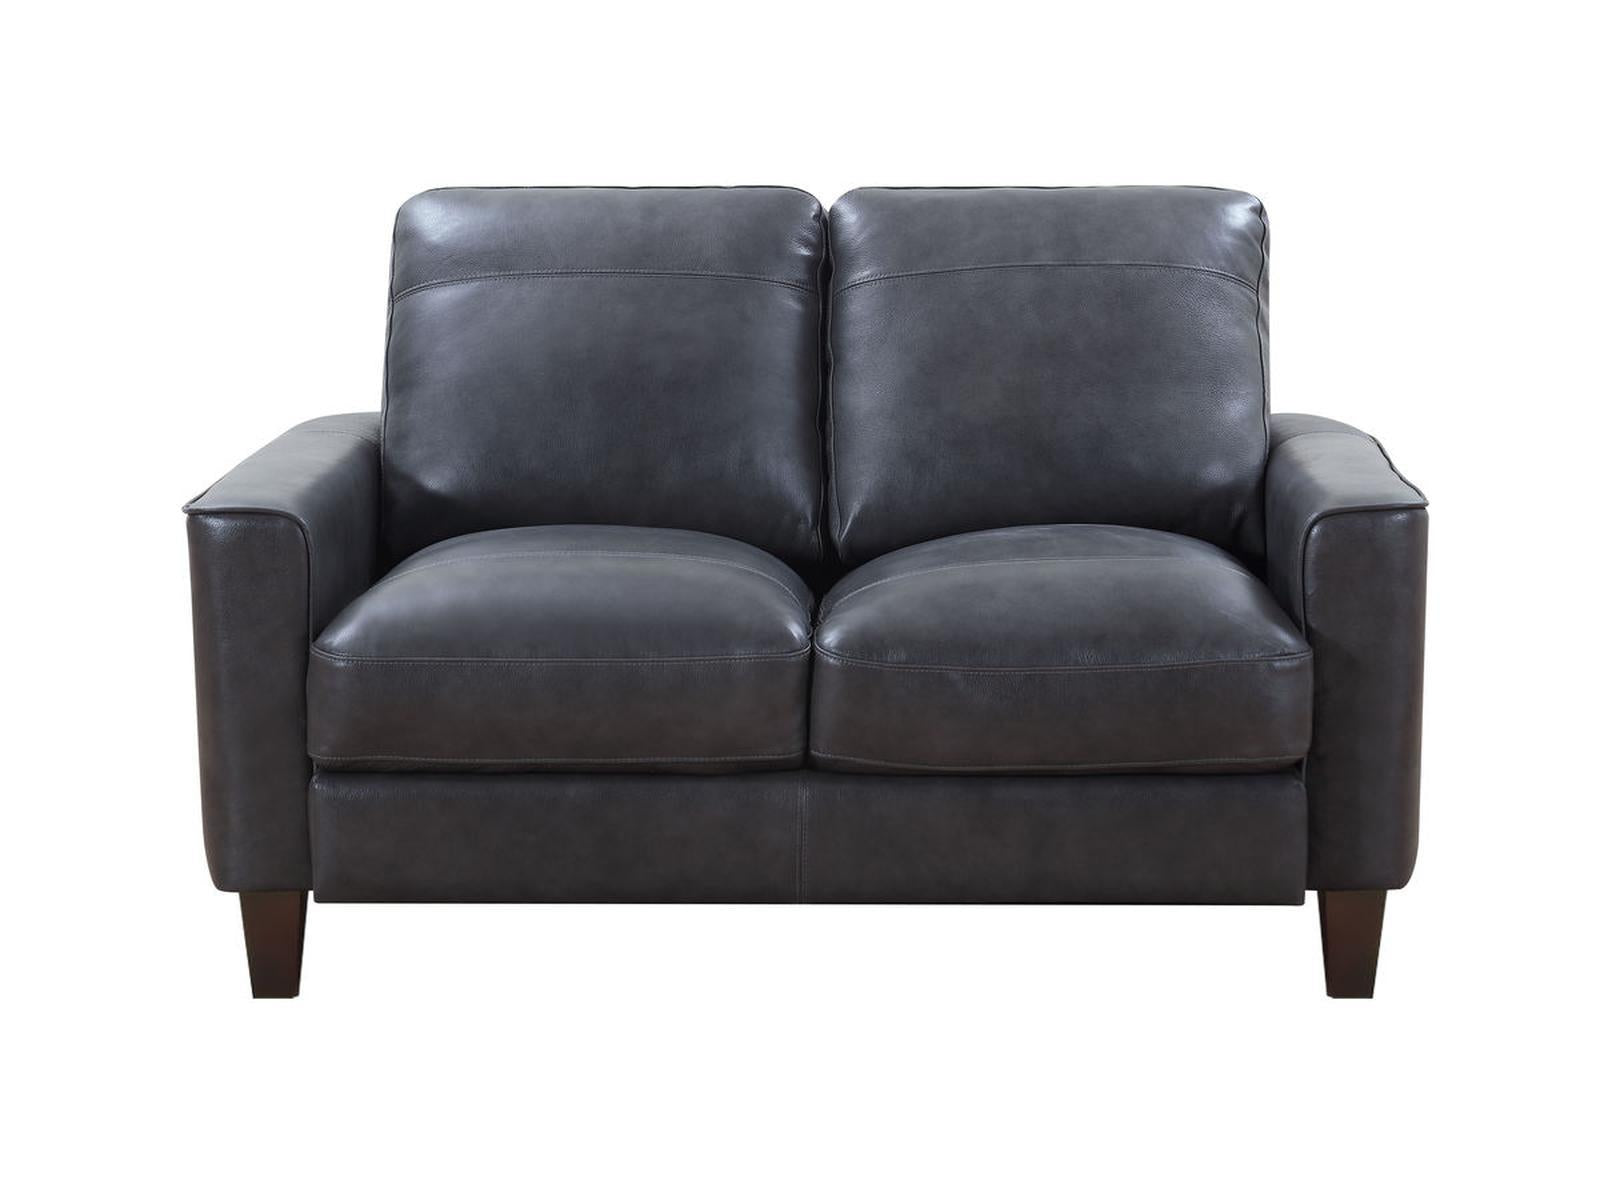 Leather Italia Georgetown-Chino Loveseat in Grey image